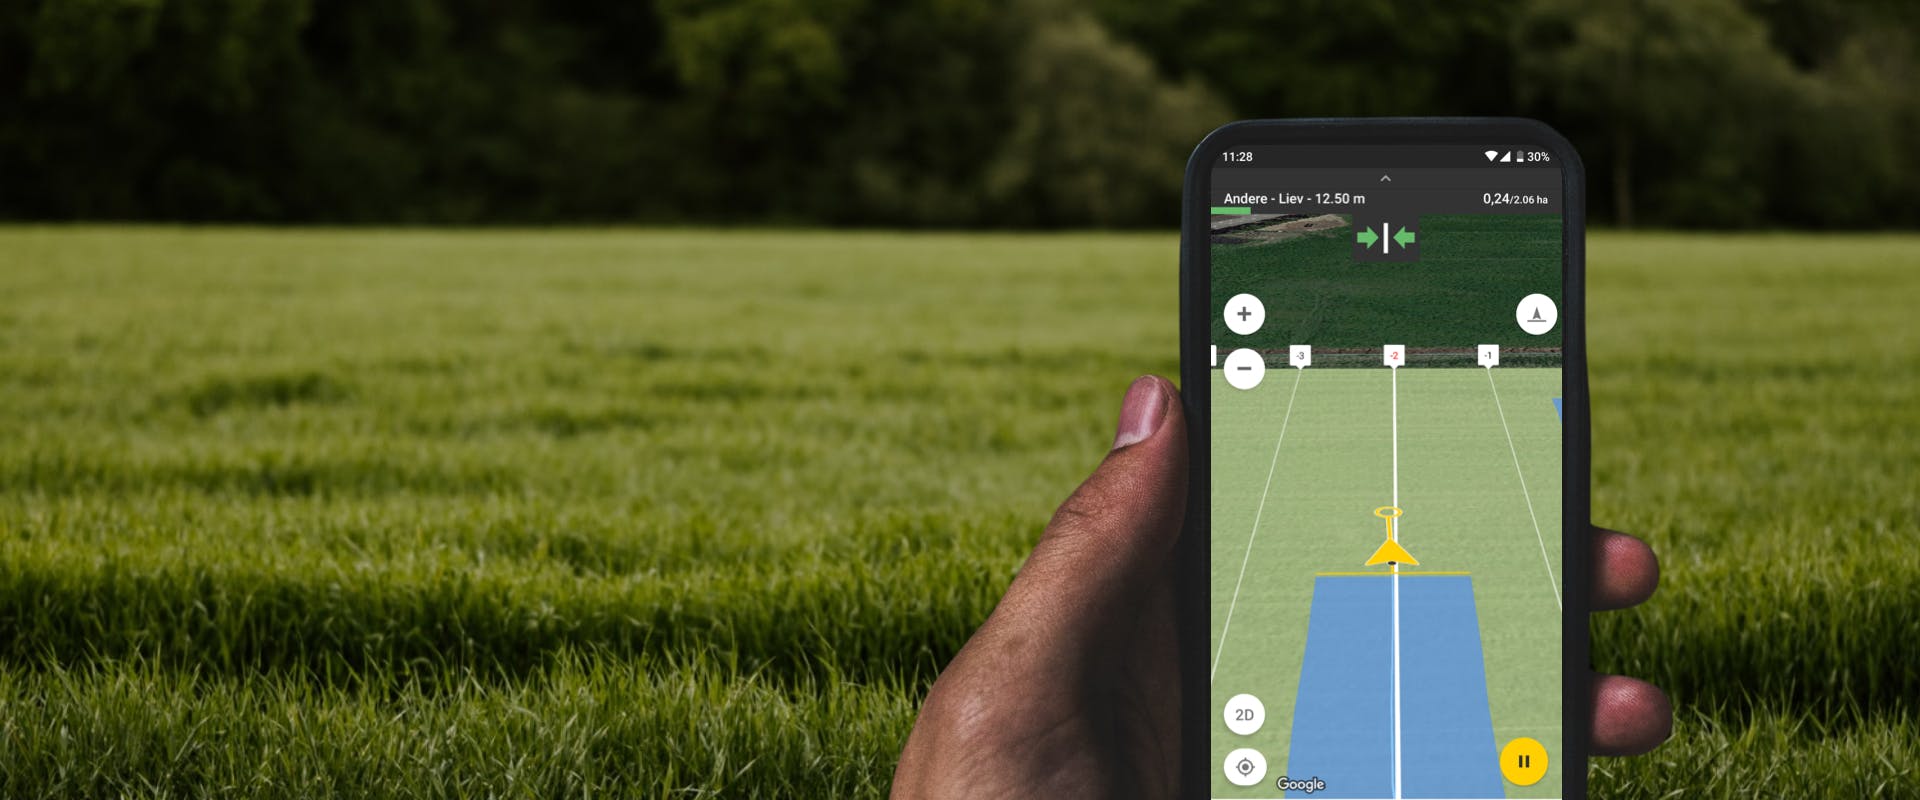 Top 5 apps for farming you should be using in 2022